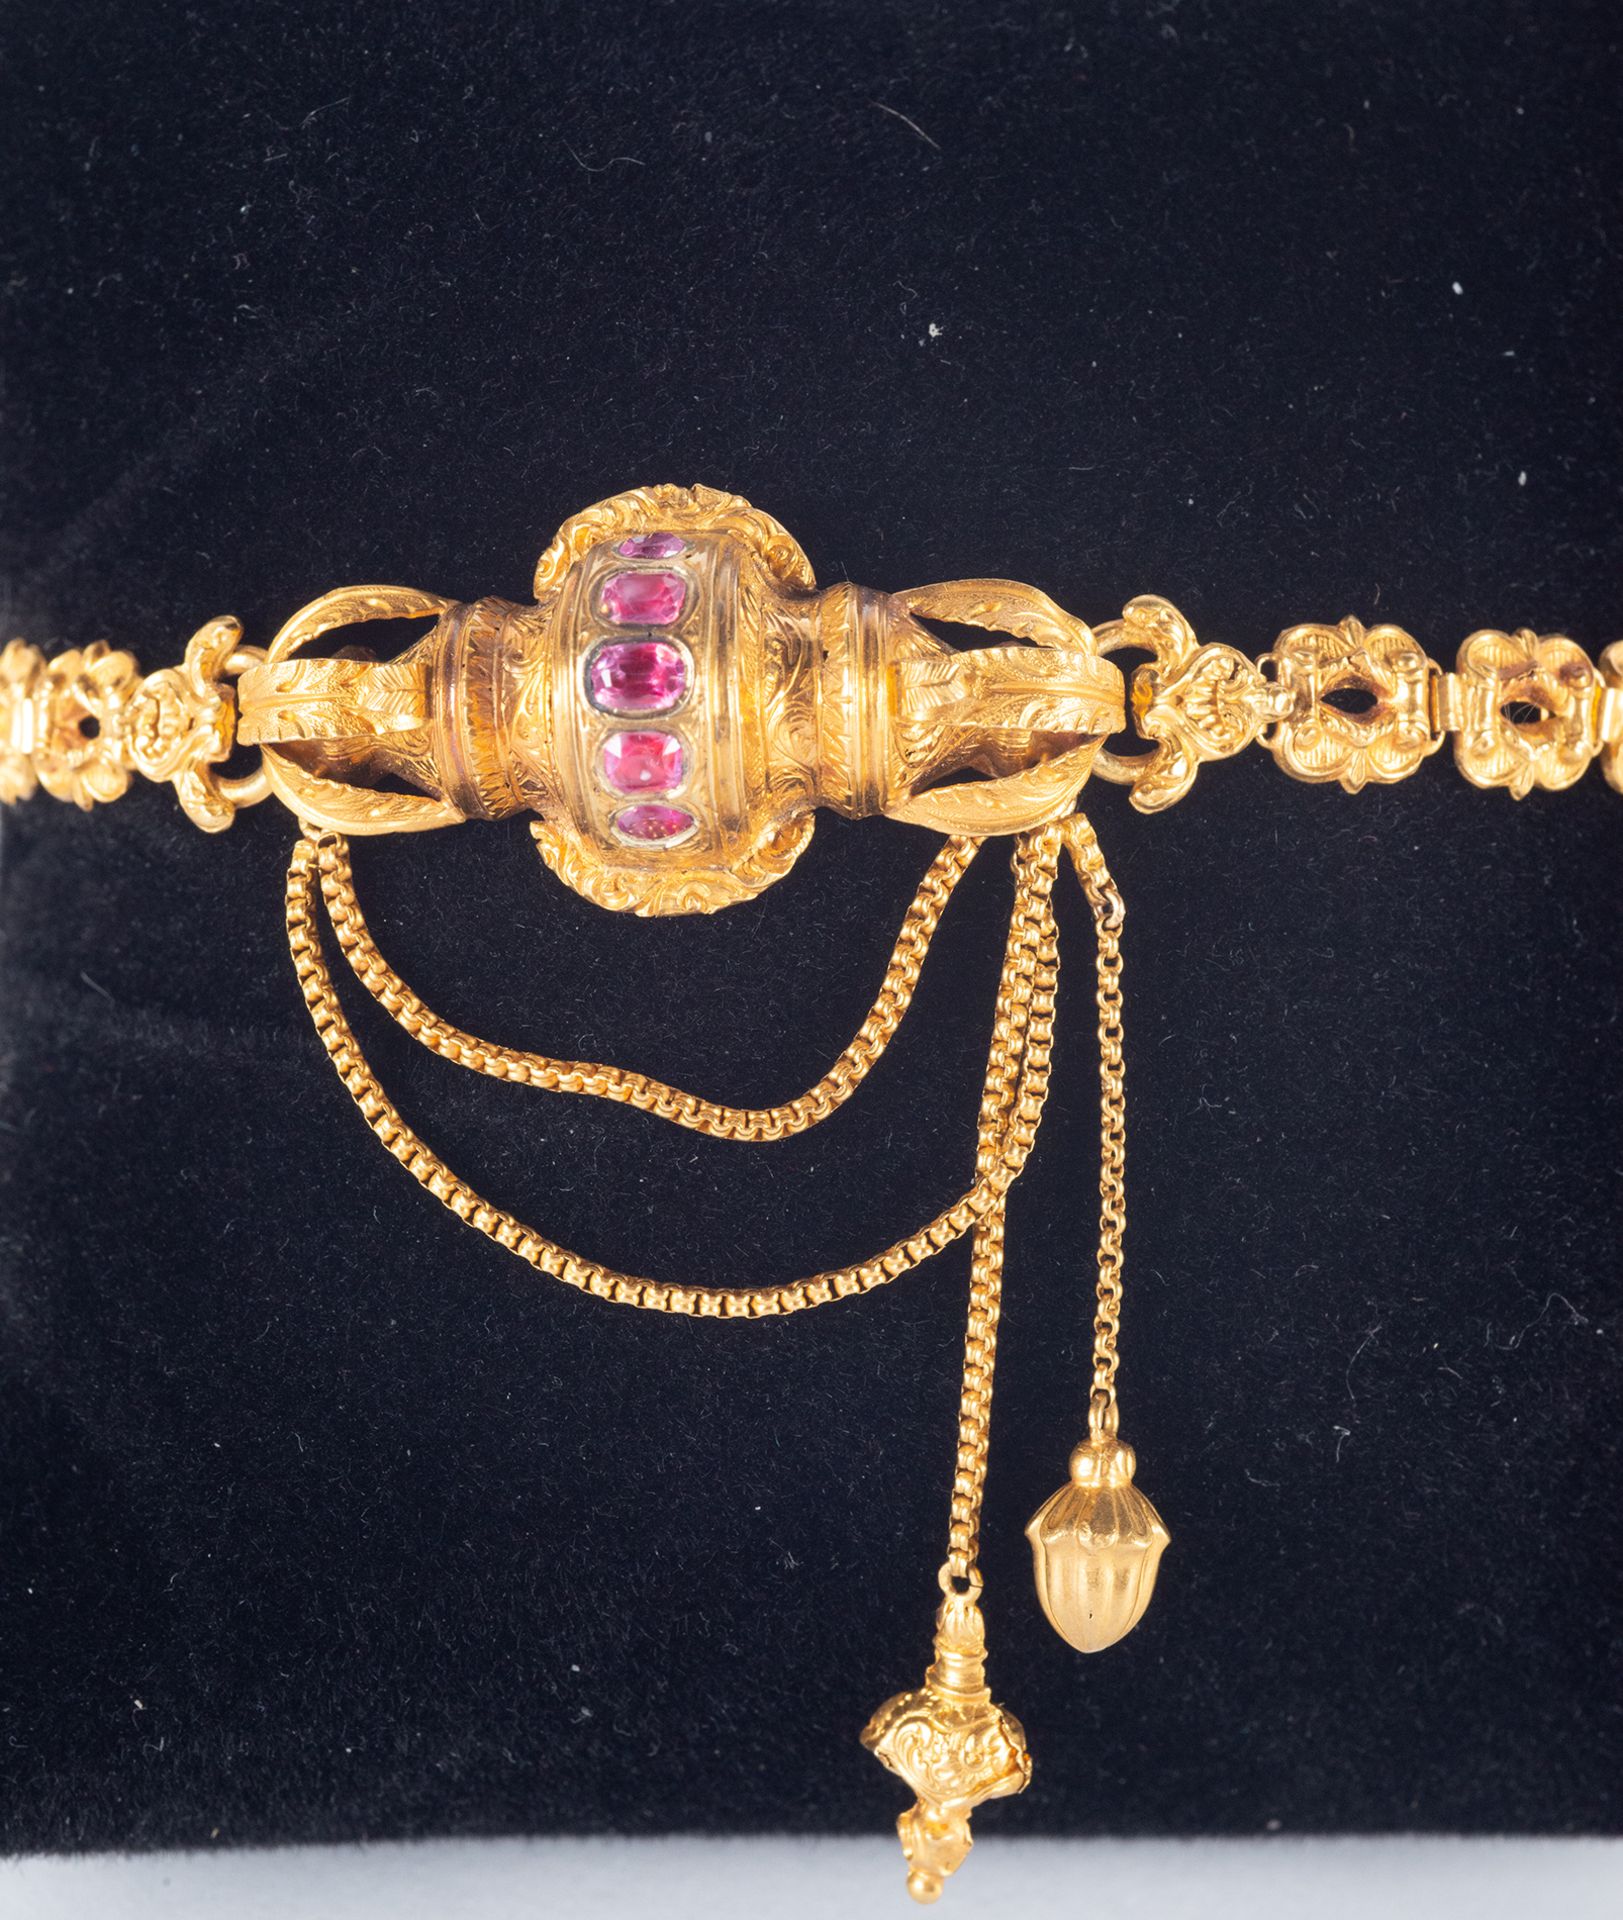 Important Directory Style Lady Bracelet, end of the 18th - 19th century, in 18-karat gold. - Image 2 of 2